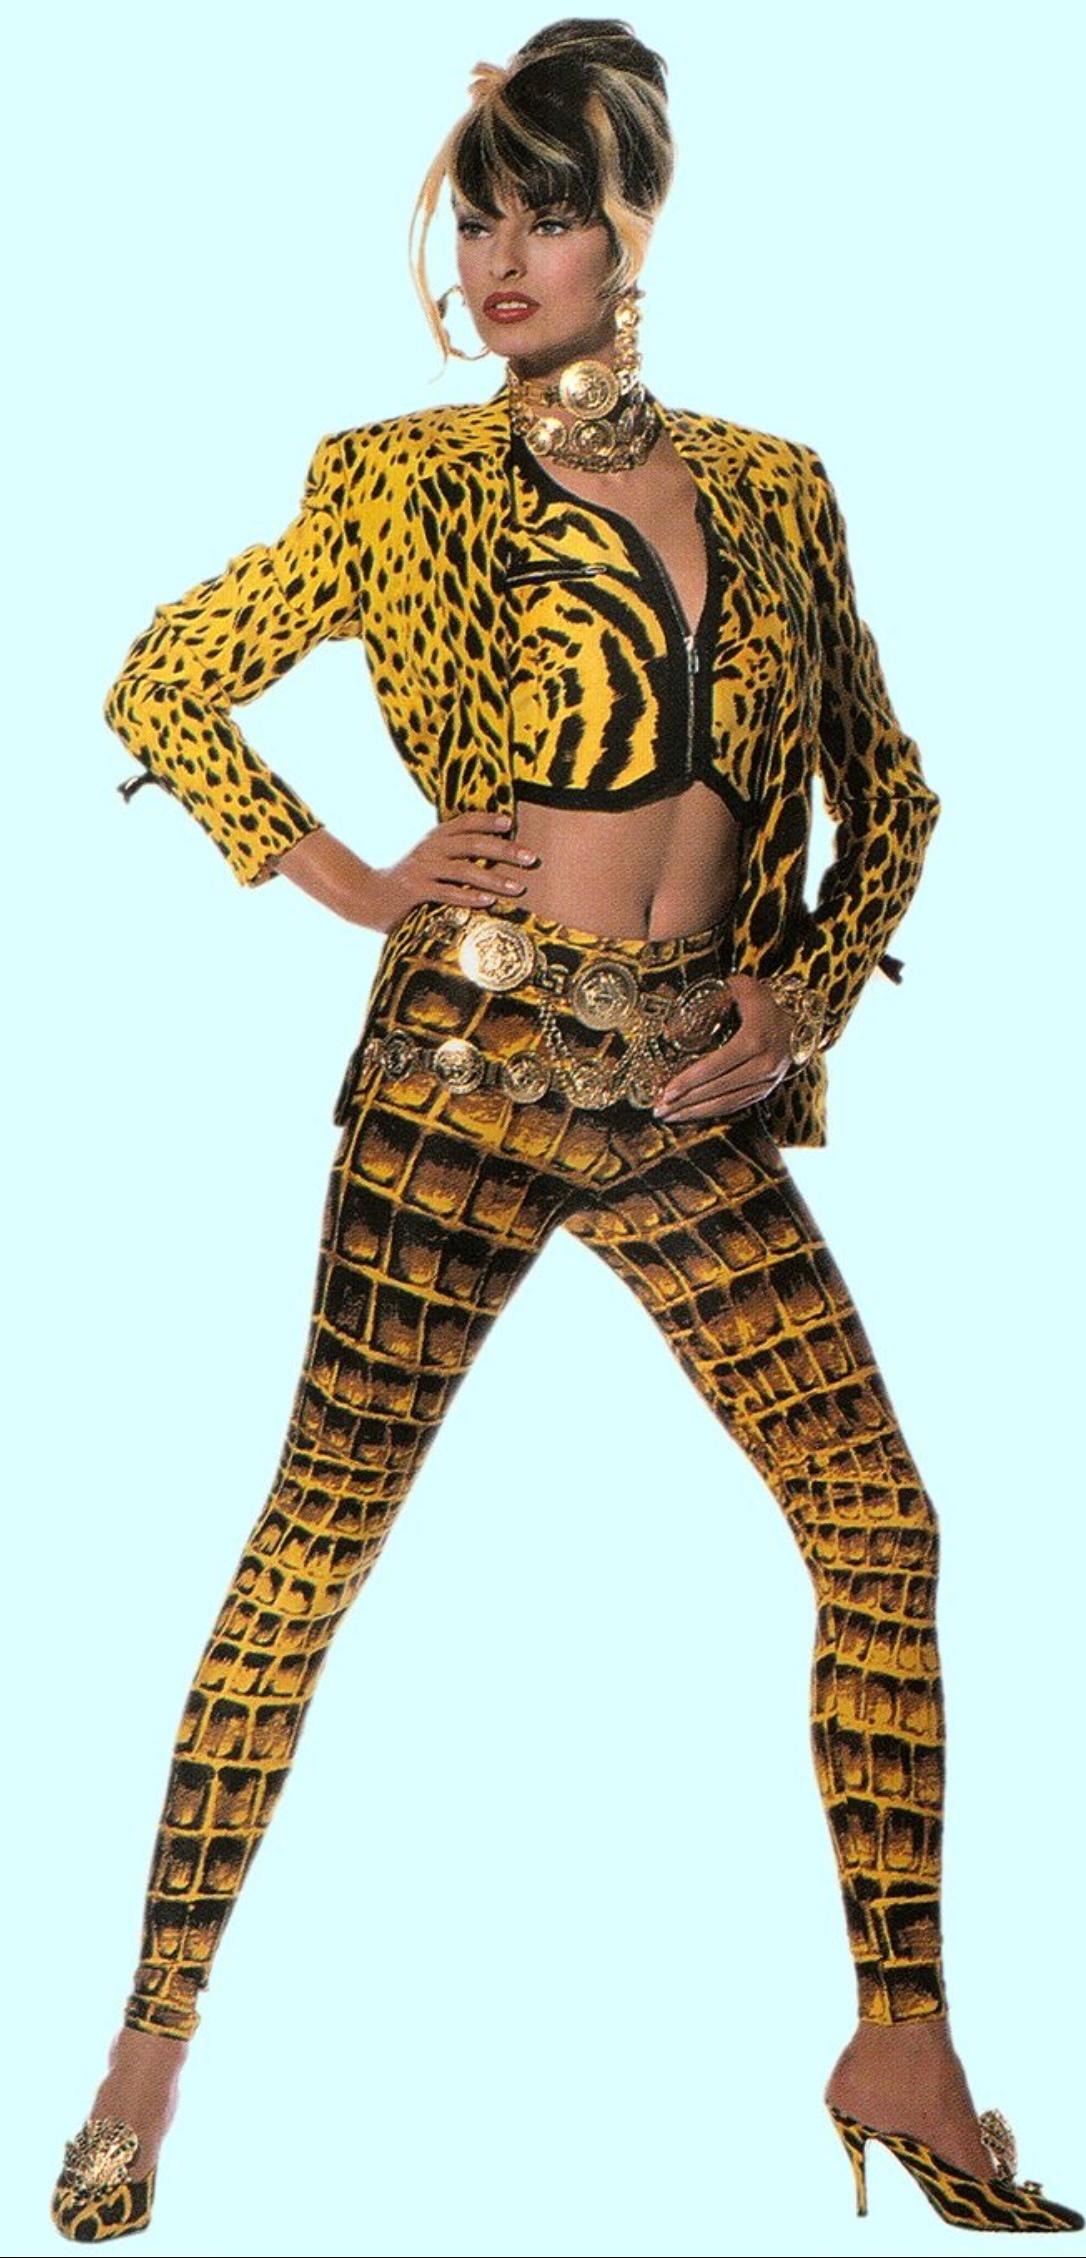 S/S 1992 Gianni Versace Runway Yellow Black Crocodile Print Leggings Tights In Excellent Condition For Sale In West Hollywood, CA